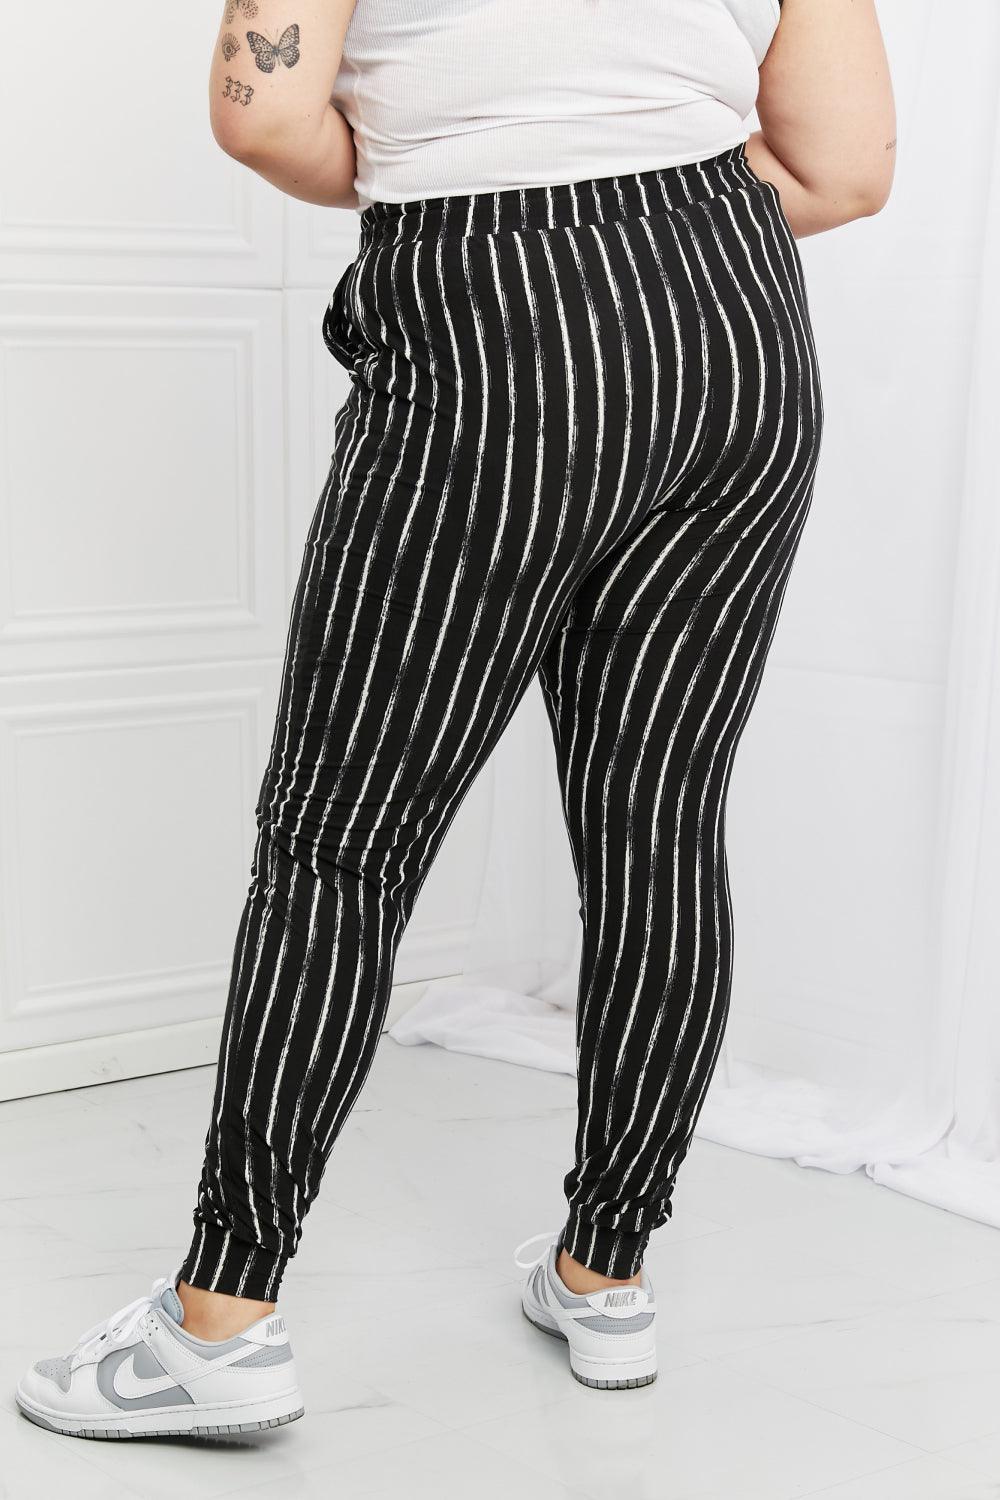 Day-To-Day Comfort Plus Size High Waisted Joggers - MXSTUDIO.COM